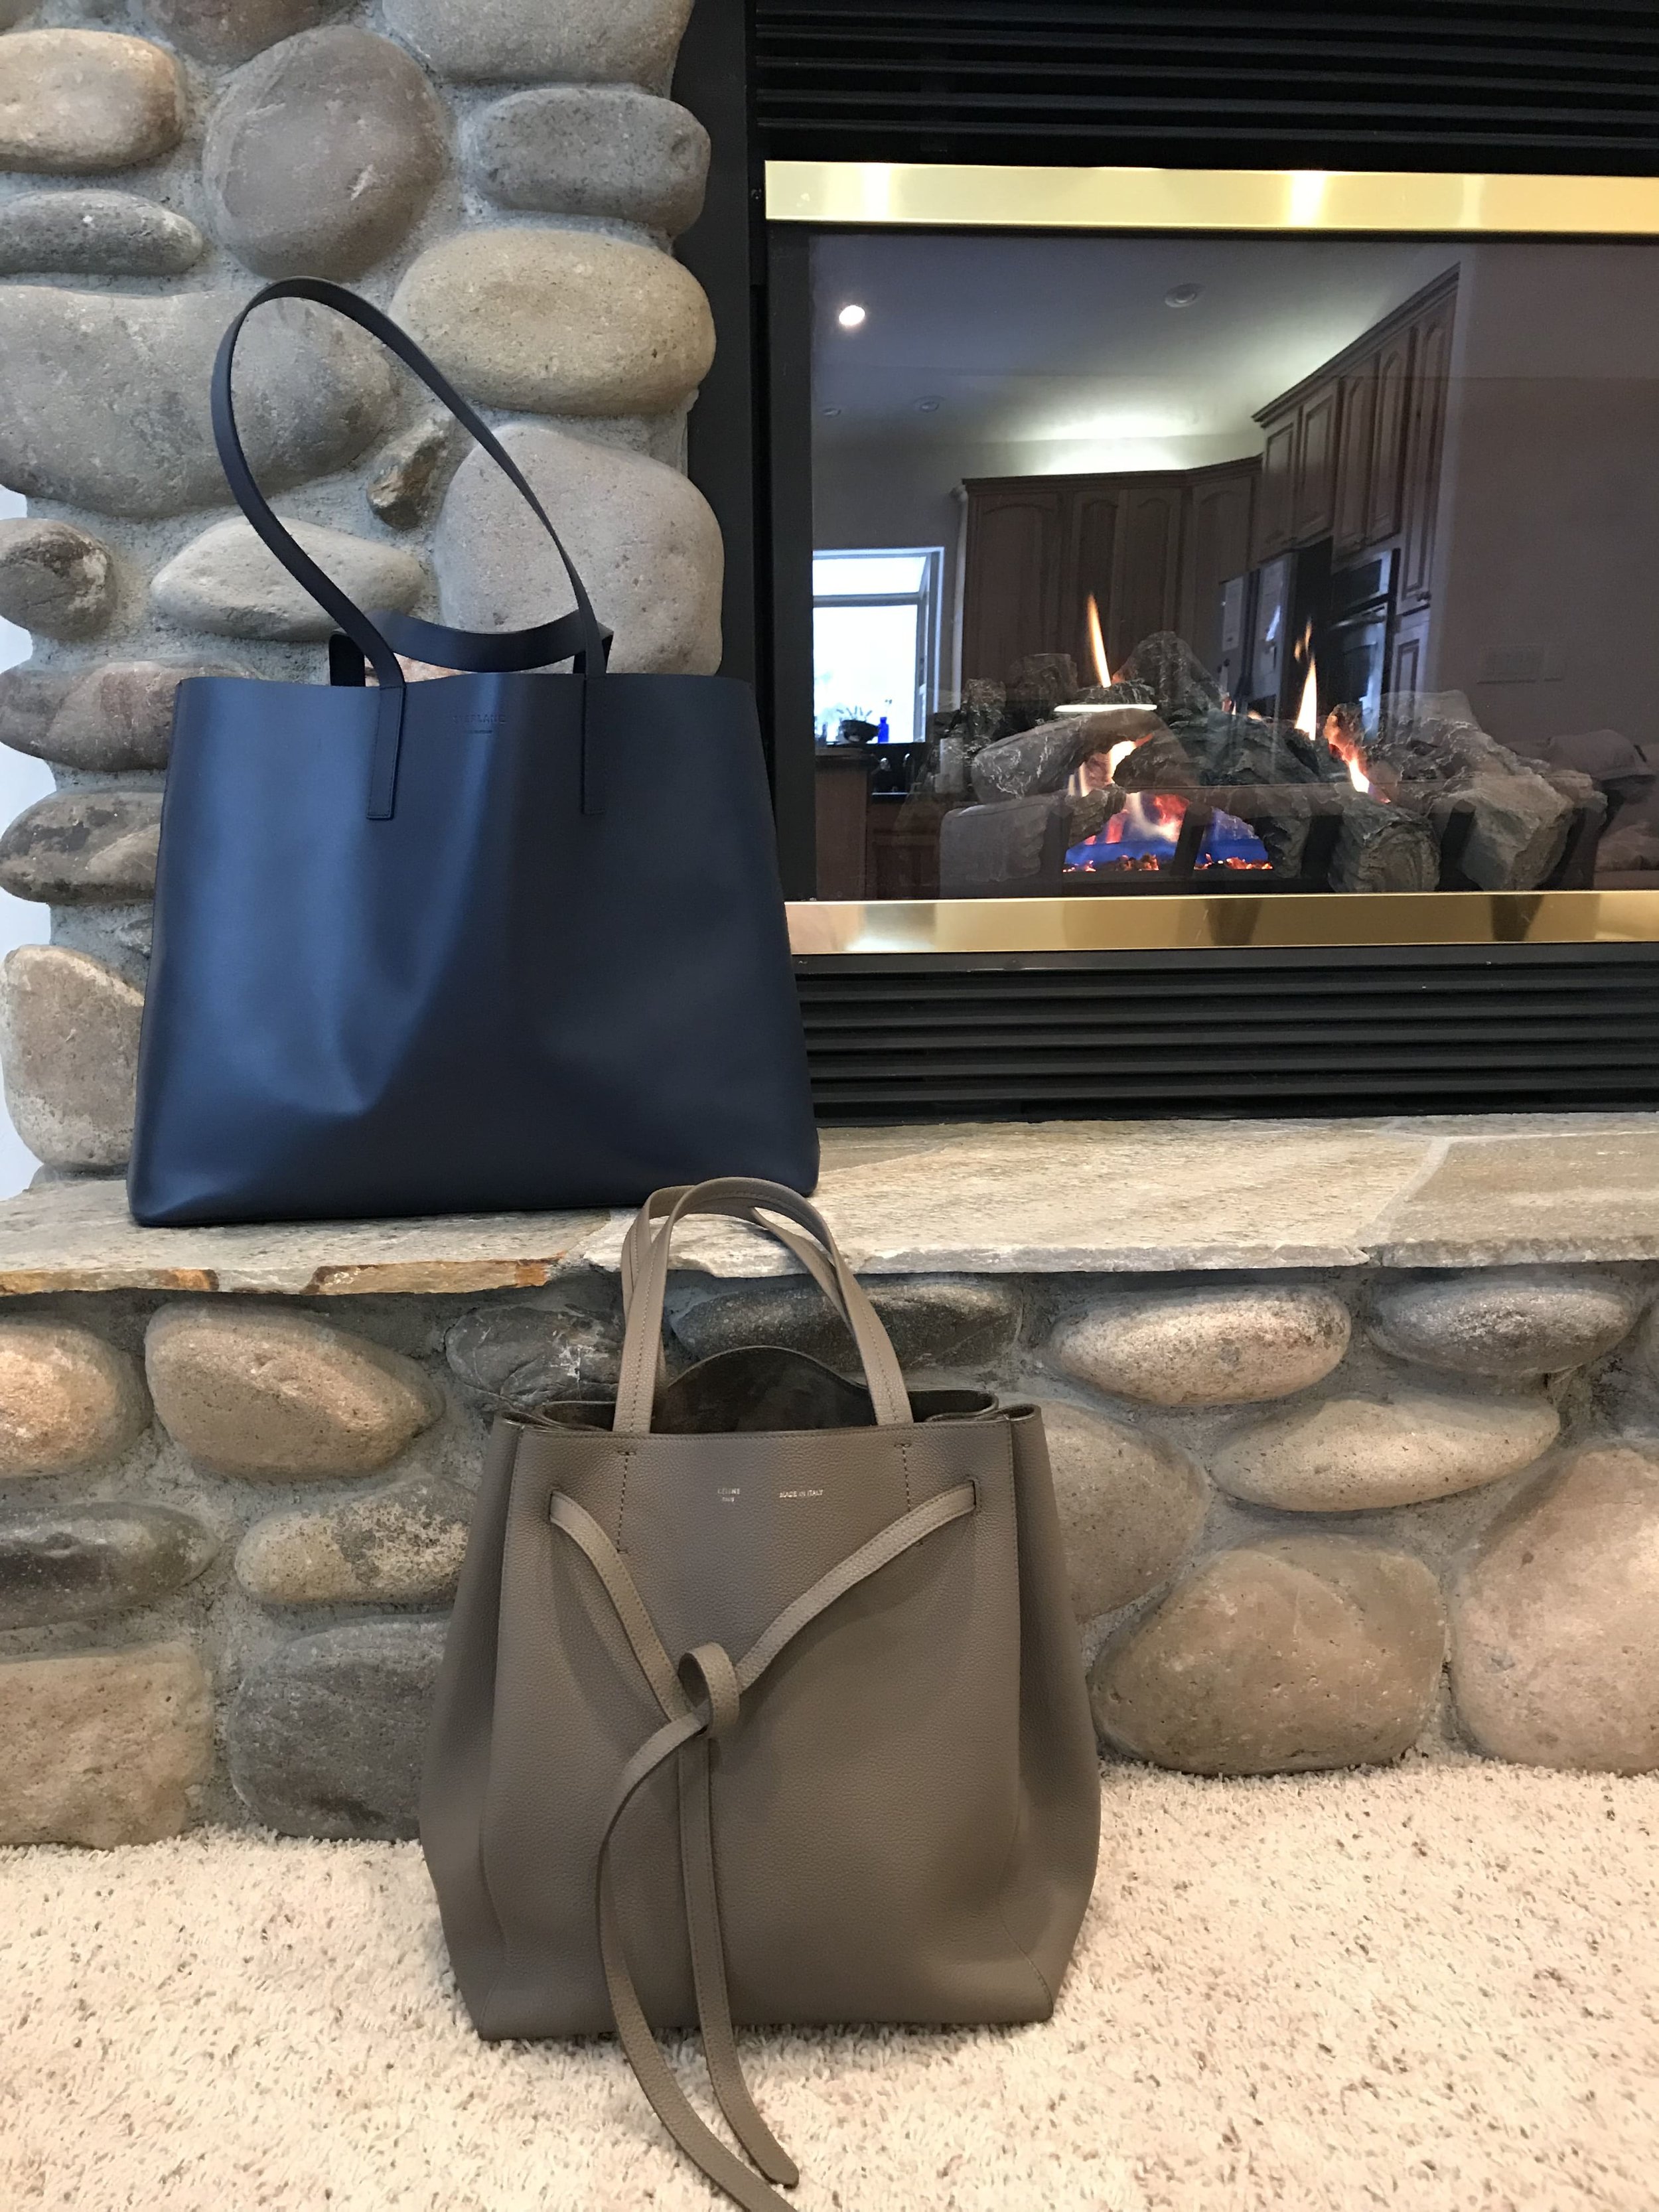 Madewell Transport Tote vs. Everlane Day Market Tote